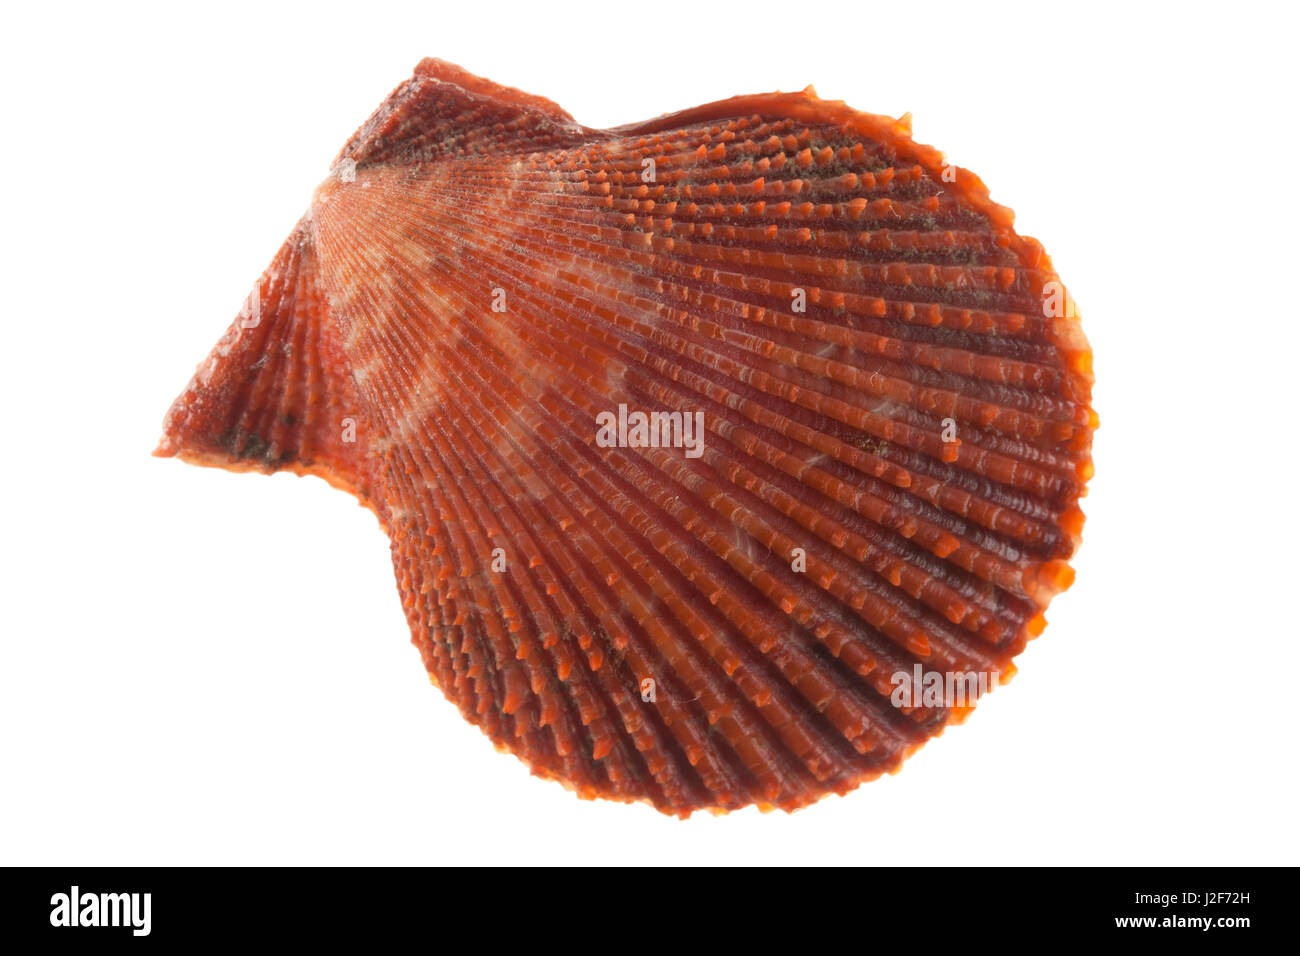 Variegated Scallop isolated against a white background Stock Photo